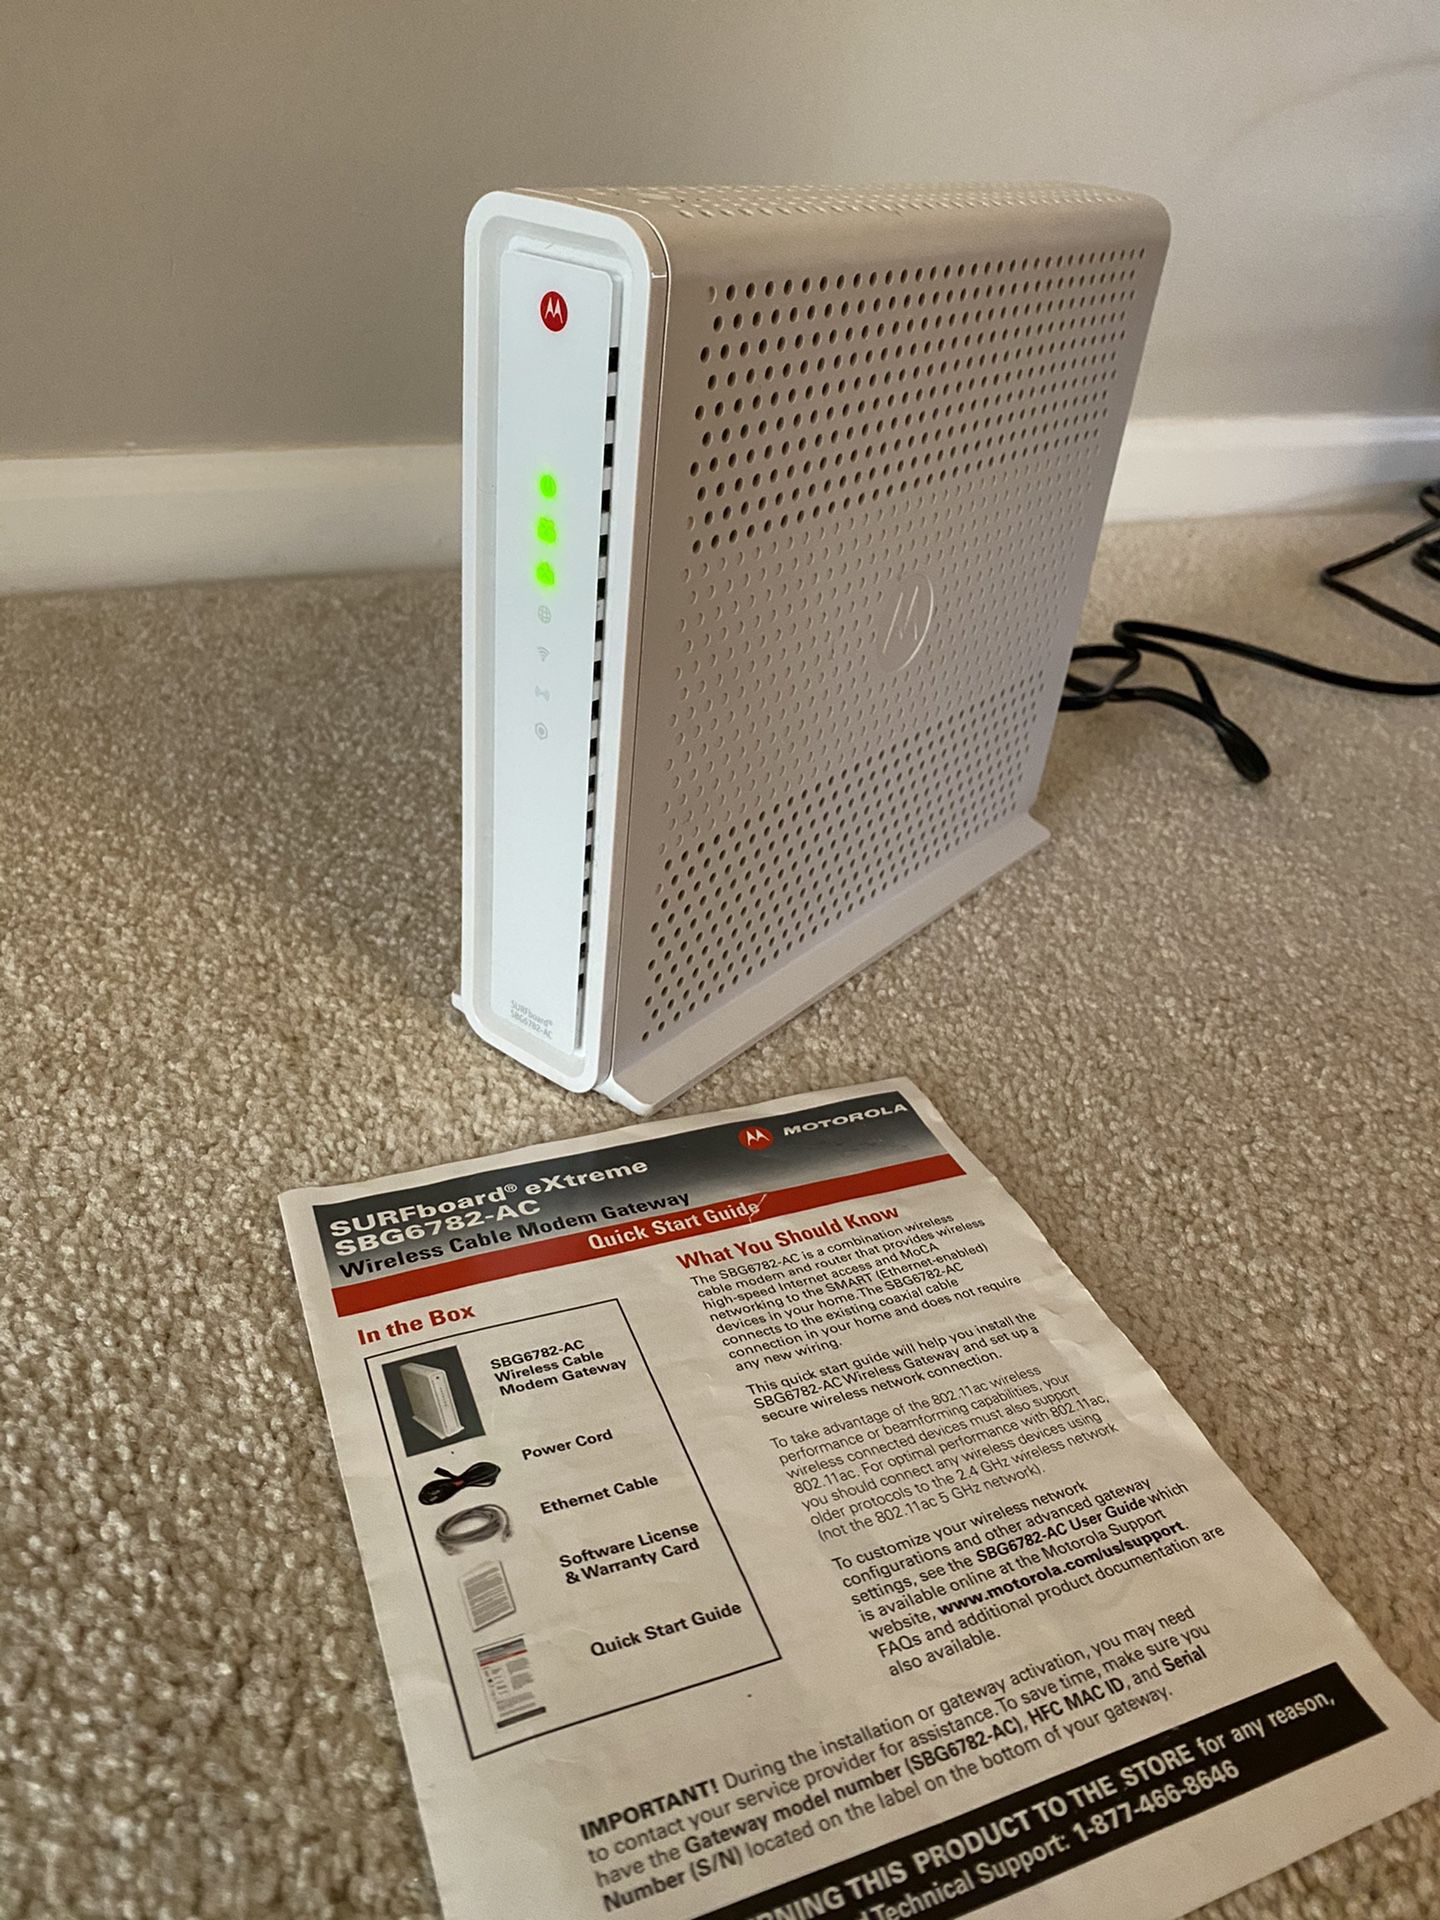 Motorola Surfboard extreme SBG6782-AC wireless cable modem router